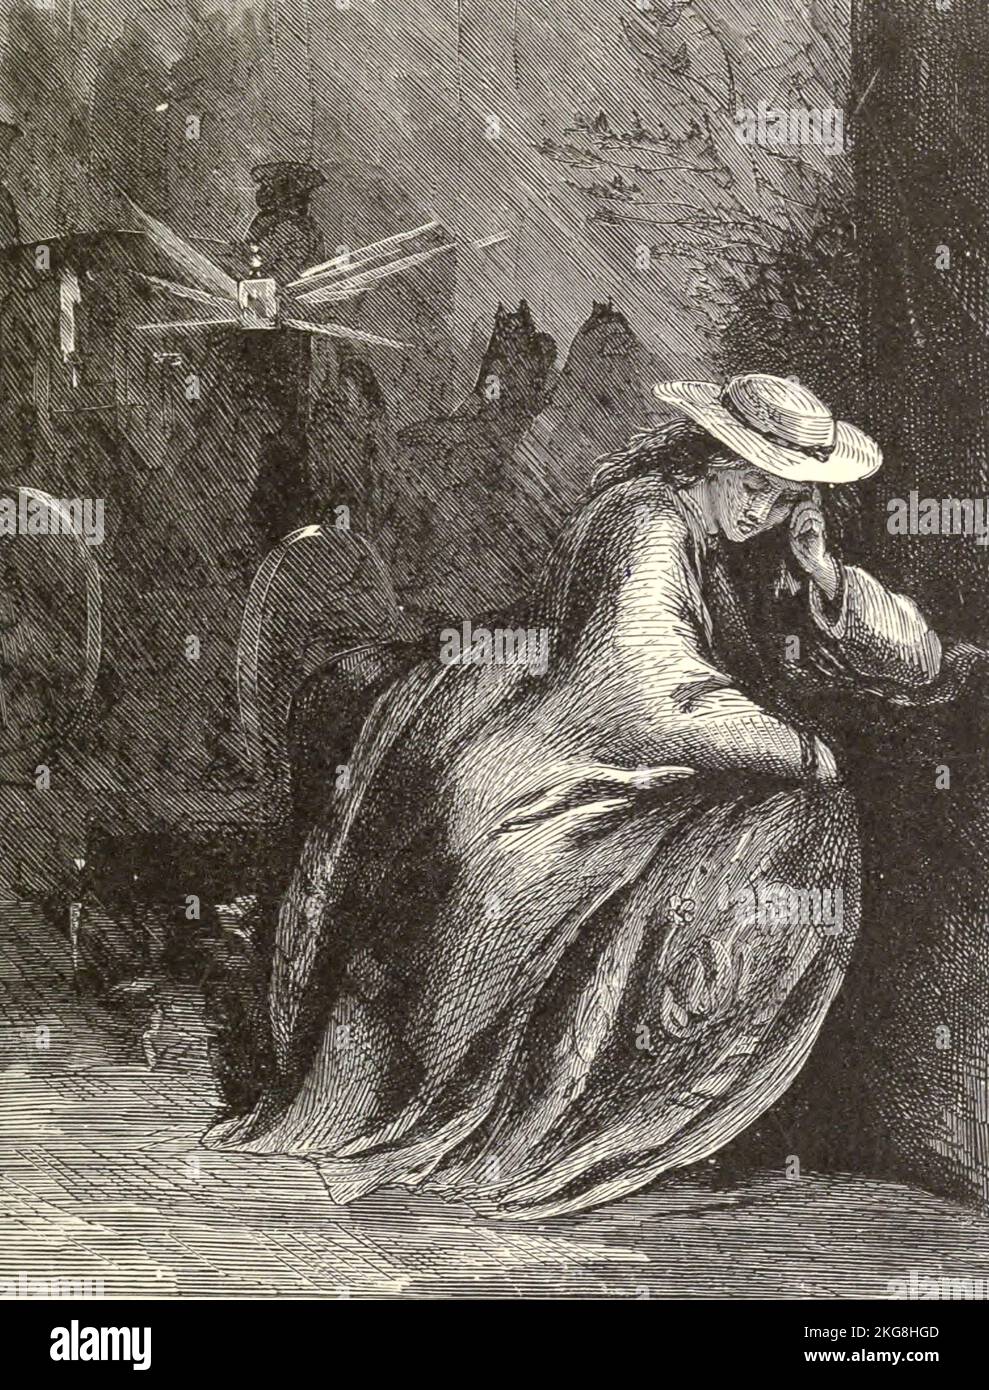 Ah ! turn thine eyes Where the poor houseless shivering female lies Illustration by Hammatt Billings from the poem The Deserted Village by Oliver Goldsmith published in 1882. The Deserted Village is a poem by Oliver Goldsmith published in 1770. It is a work of social commentary, and condemns rural depopulation and the pursuit of excessive wealth. Oliver Goldsmith (10 November 1728 – 4 April 1774) was an Anglo-Irish novelist, playwright, dramatist and poet, who is best known for his novel The Vicar of Wakefield (1766), his pastoral poem The Deserted Village (1770), and his plays The Good-Natur' Stock Photo